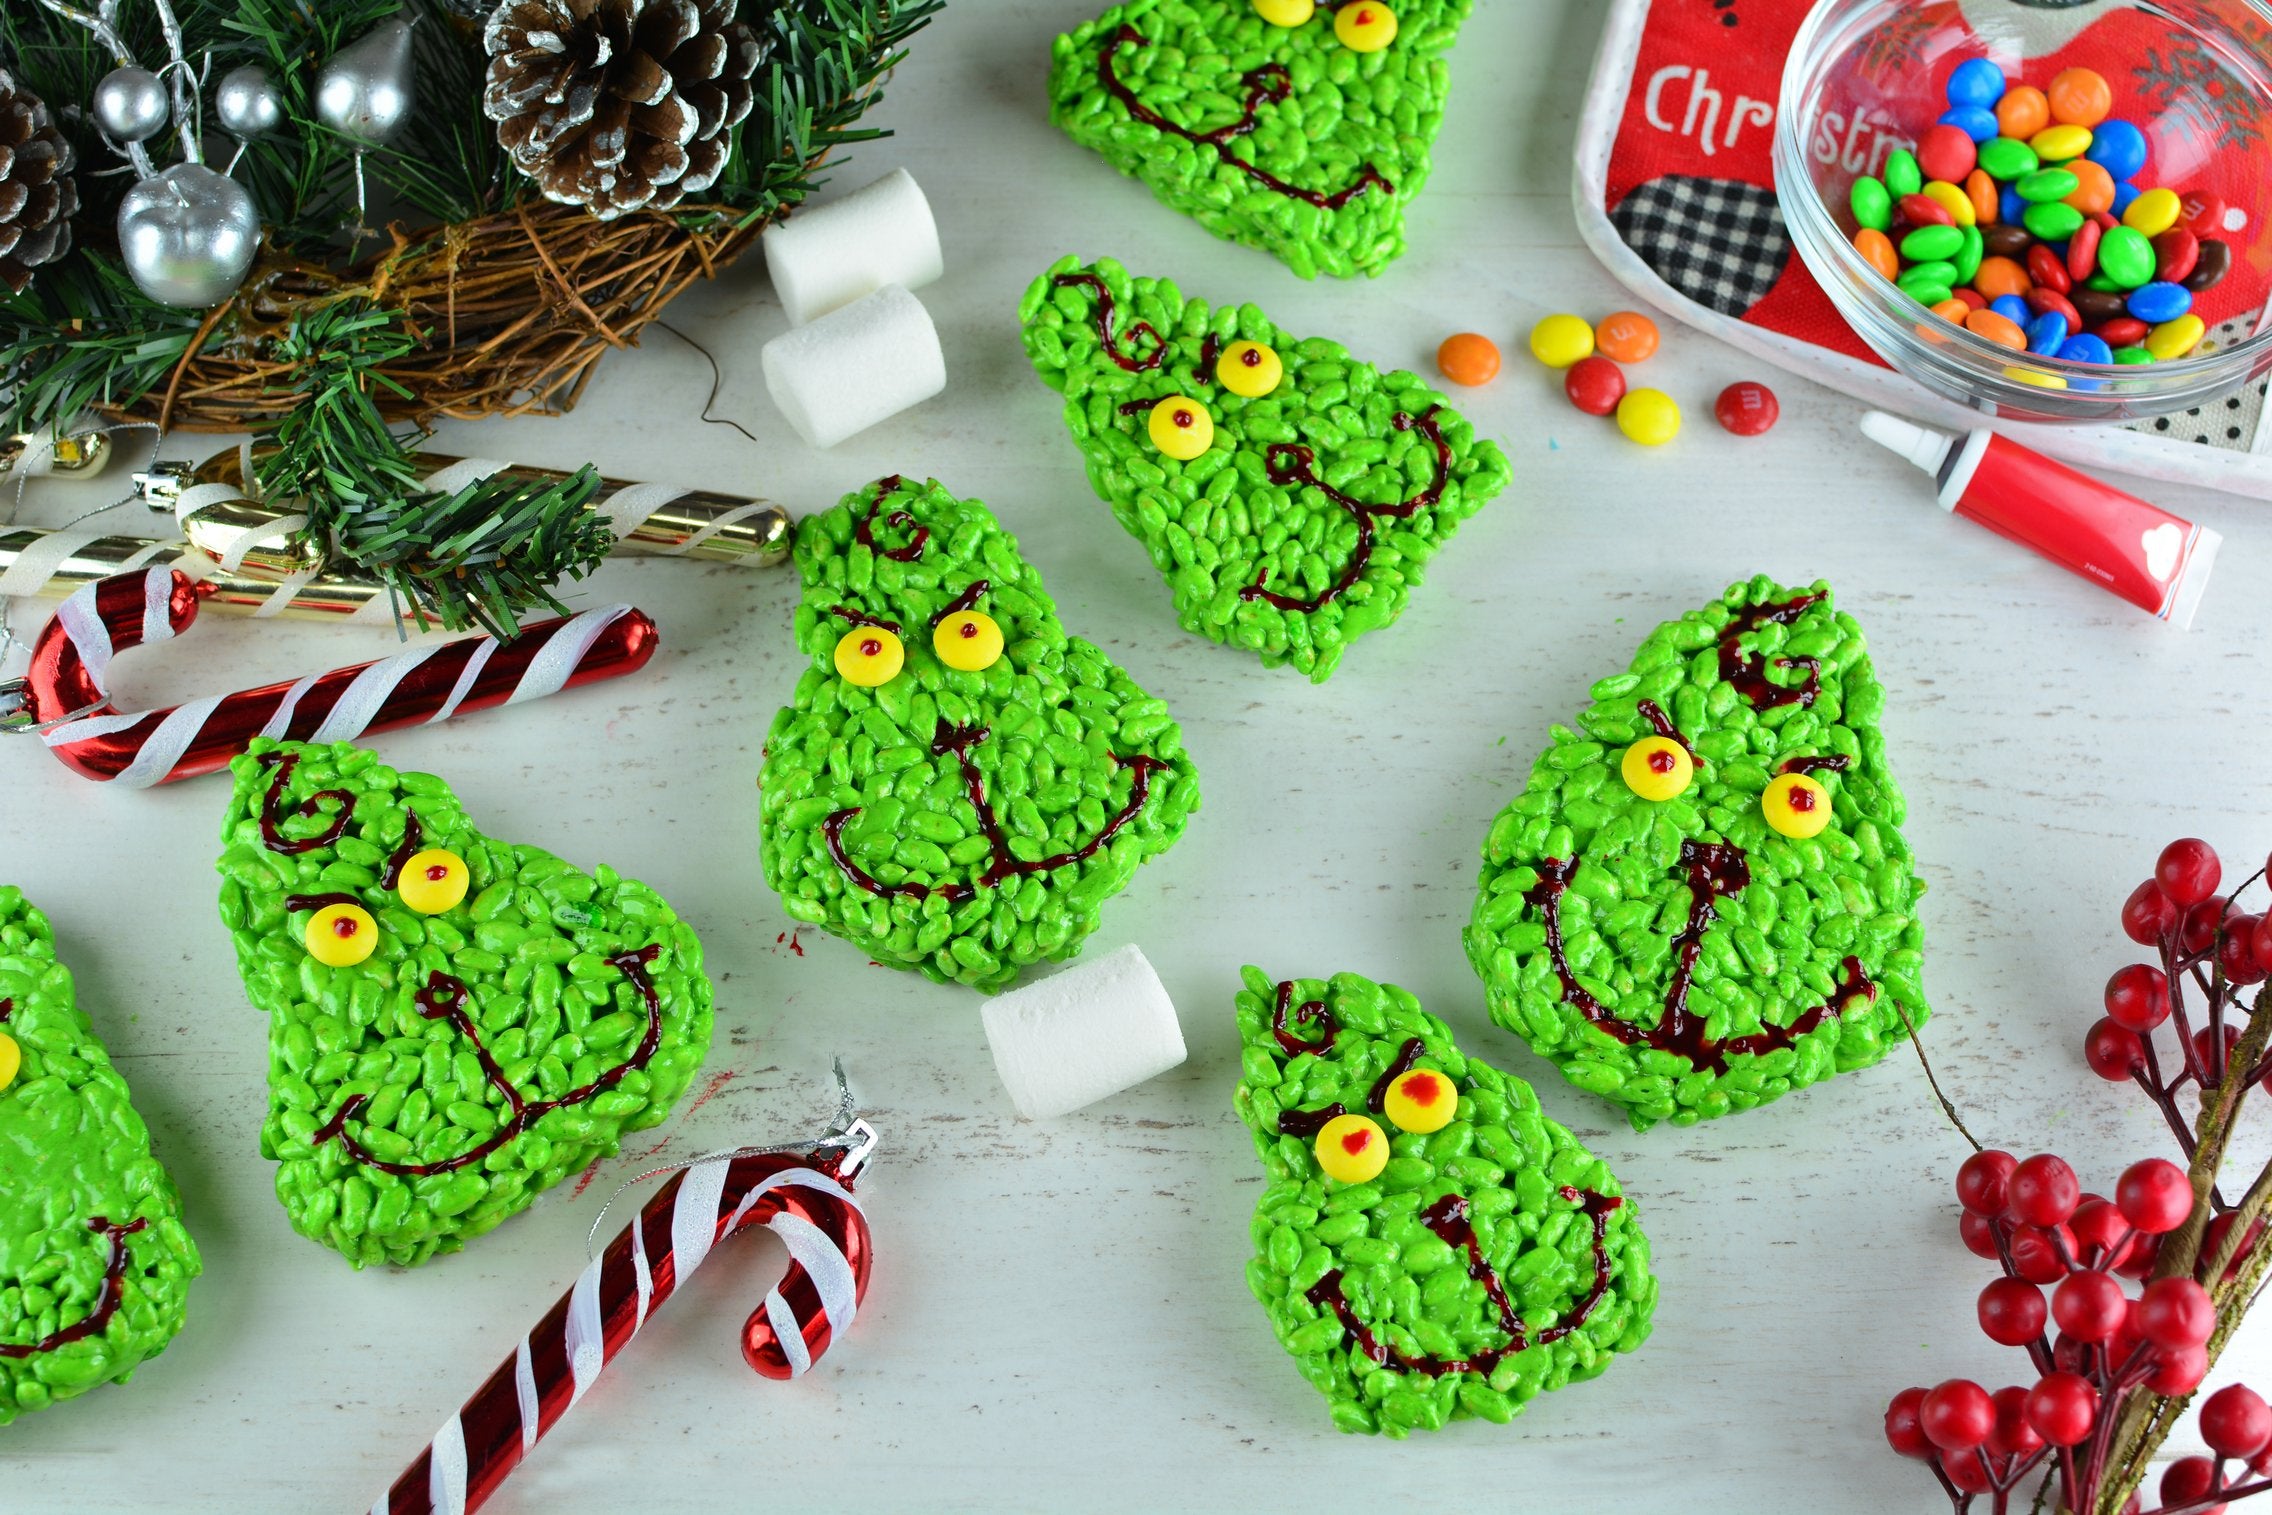 marshmallow-matcha-grinch-cookies-with-m-m-s-final